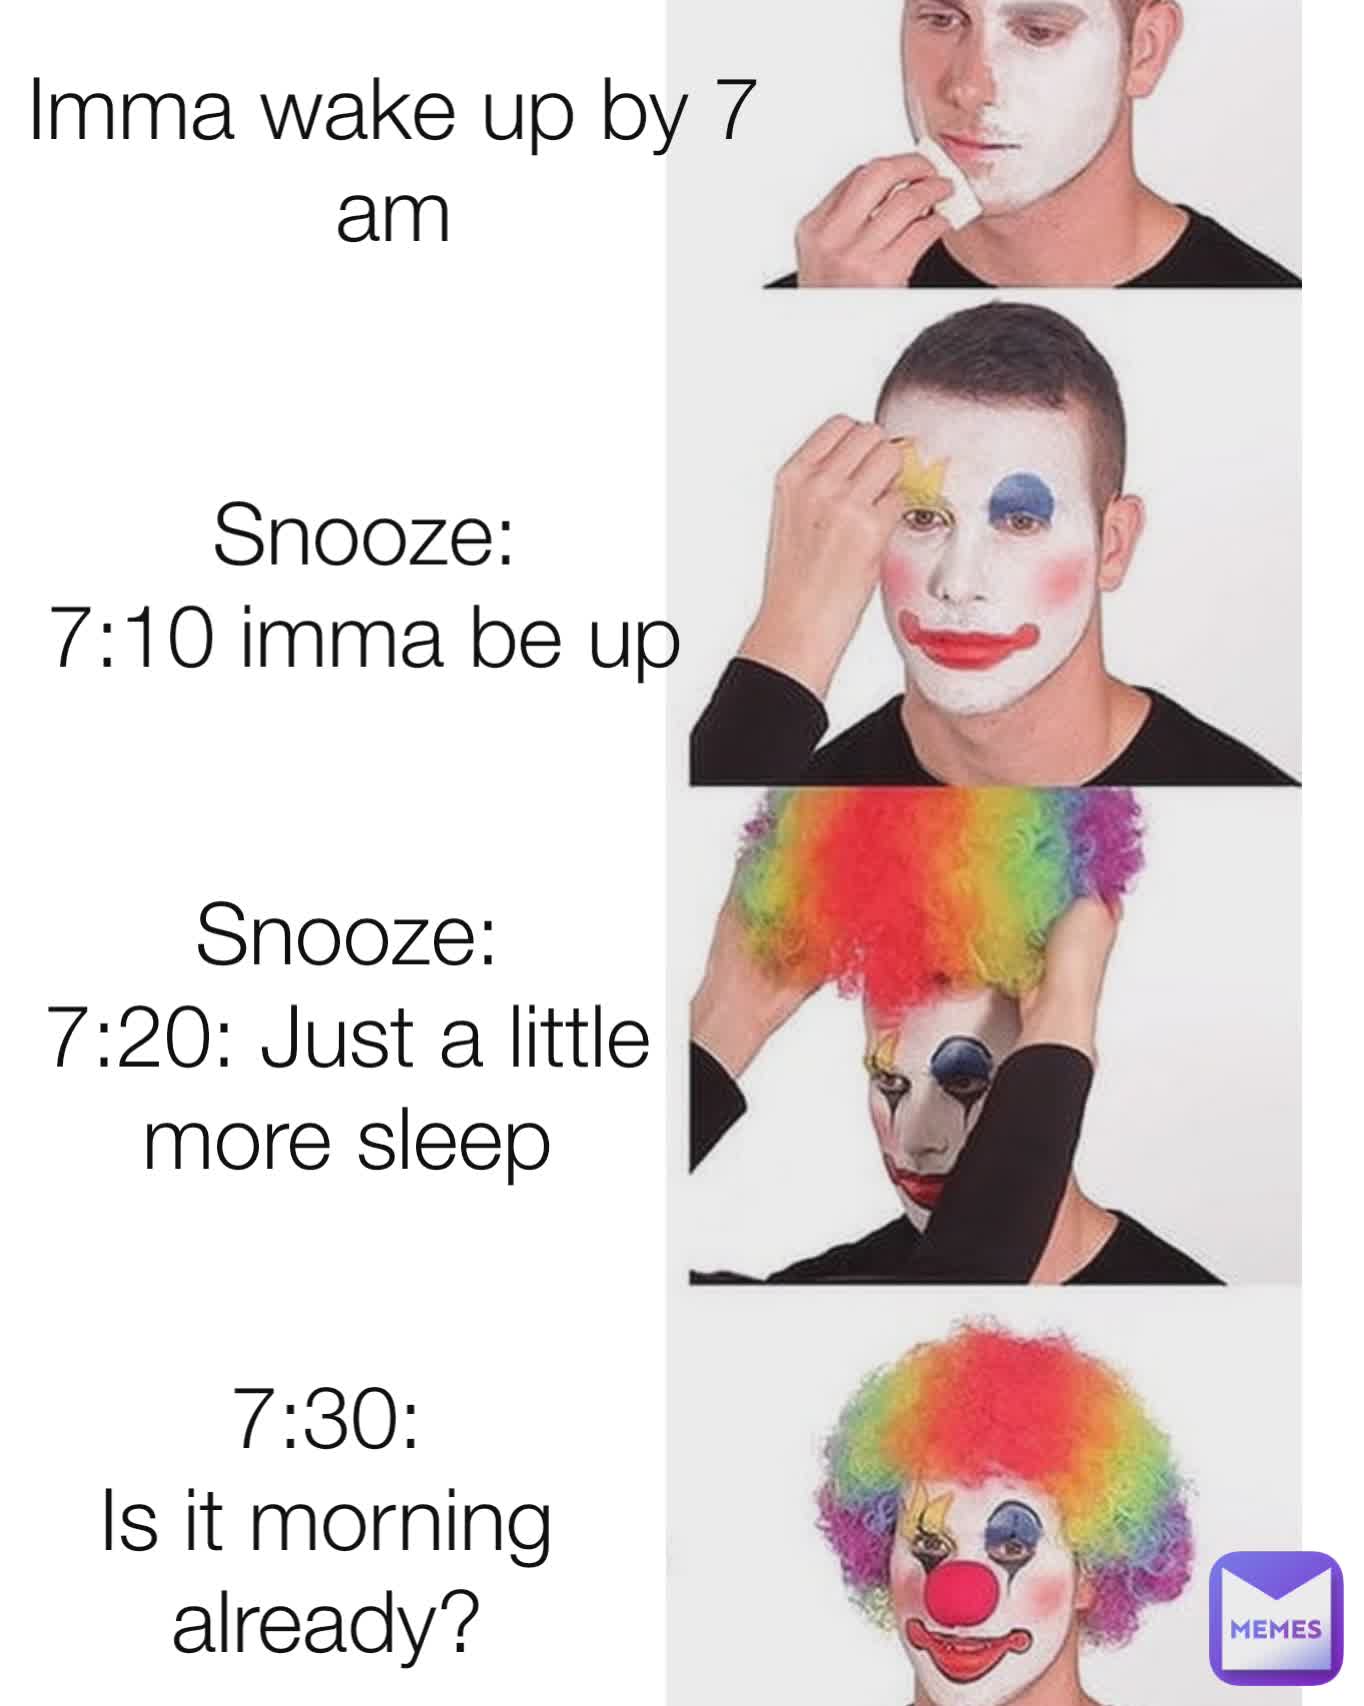 Imma wake up by 7 am Snooze:
7:10 imma be up 7:30:
Is it morning already? Snooze:
7:20: Just a little more sleep